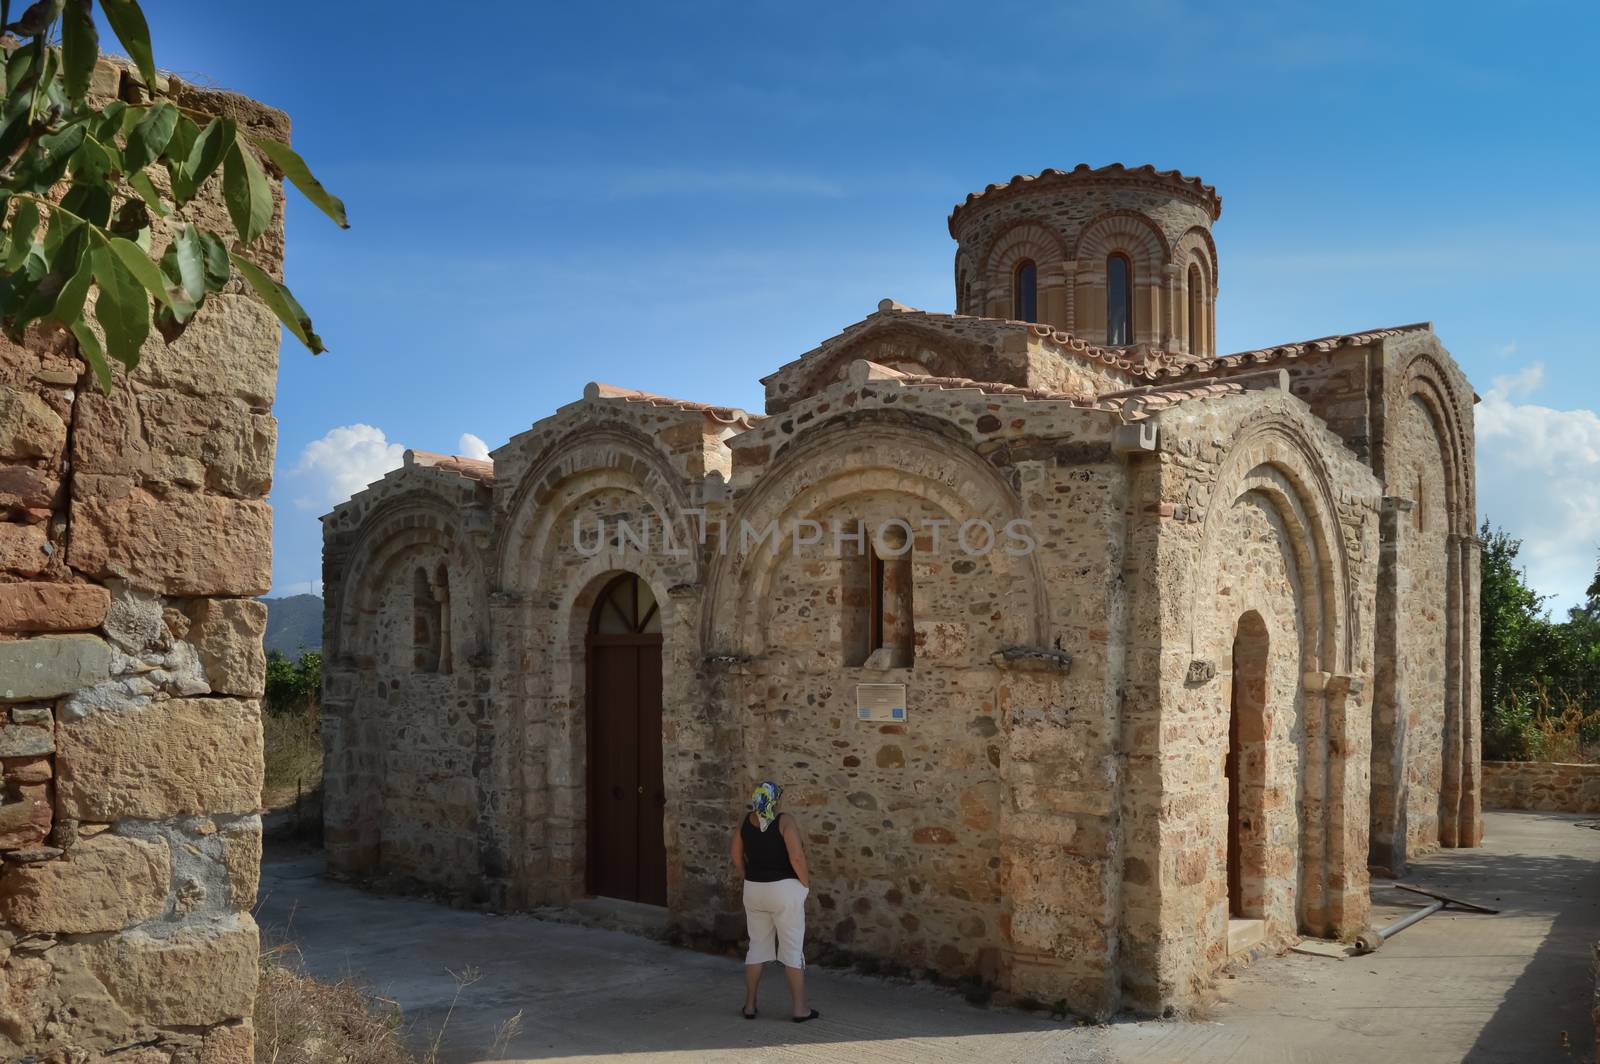 Church zoodohos pigi in the north west of the island of Crete